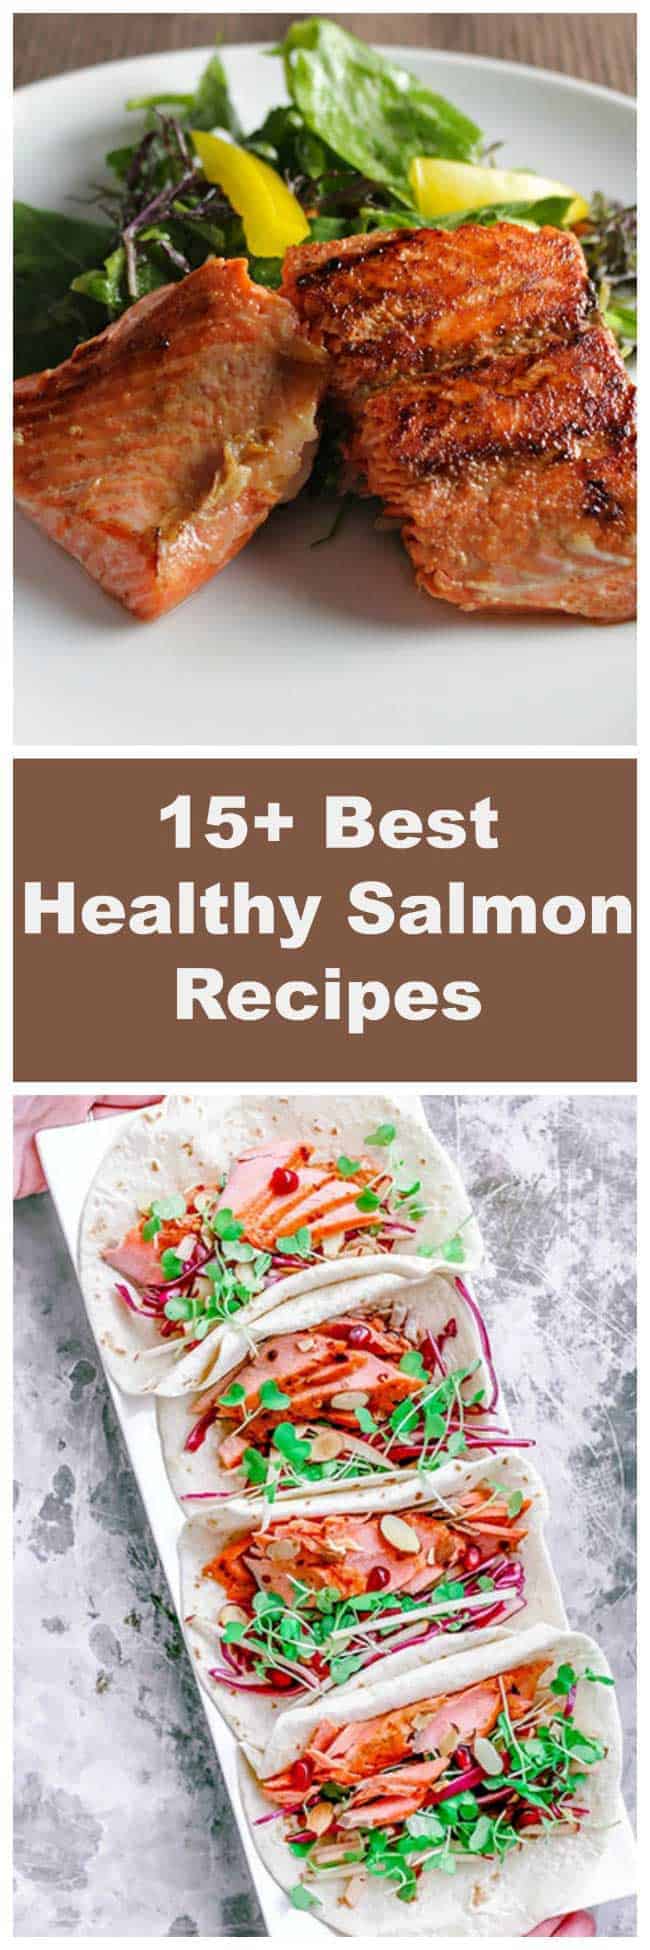 15+ of the best healthy salmon recipes, including pan seared salmon, easy baked salmon and from the grill. #salmon #seafood